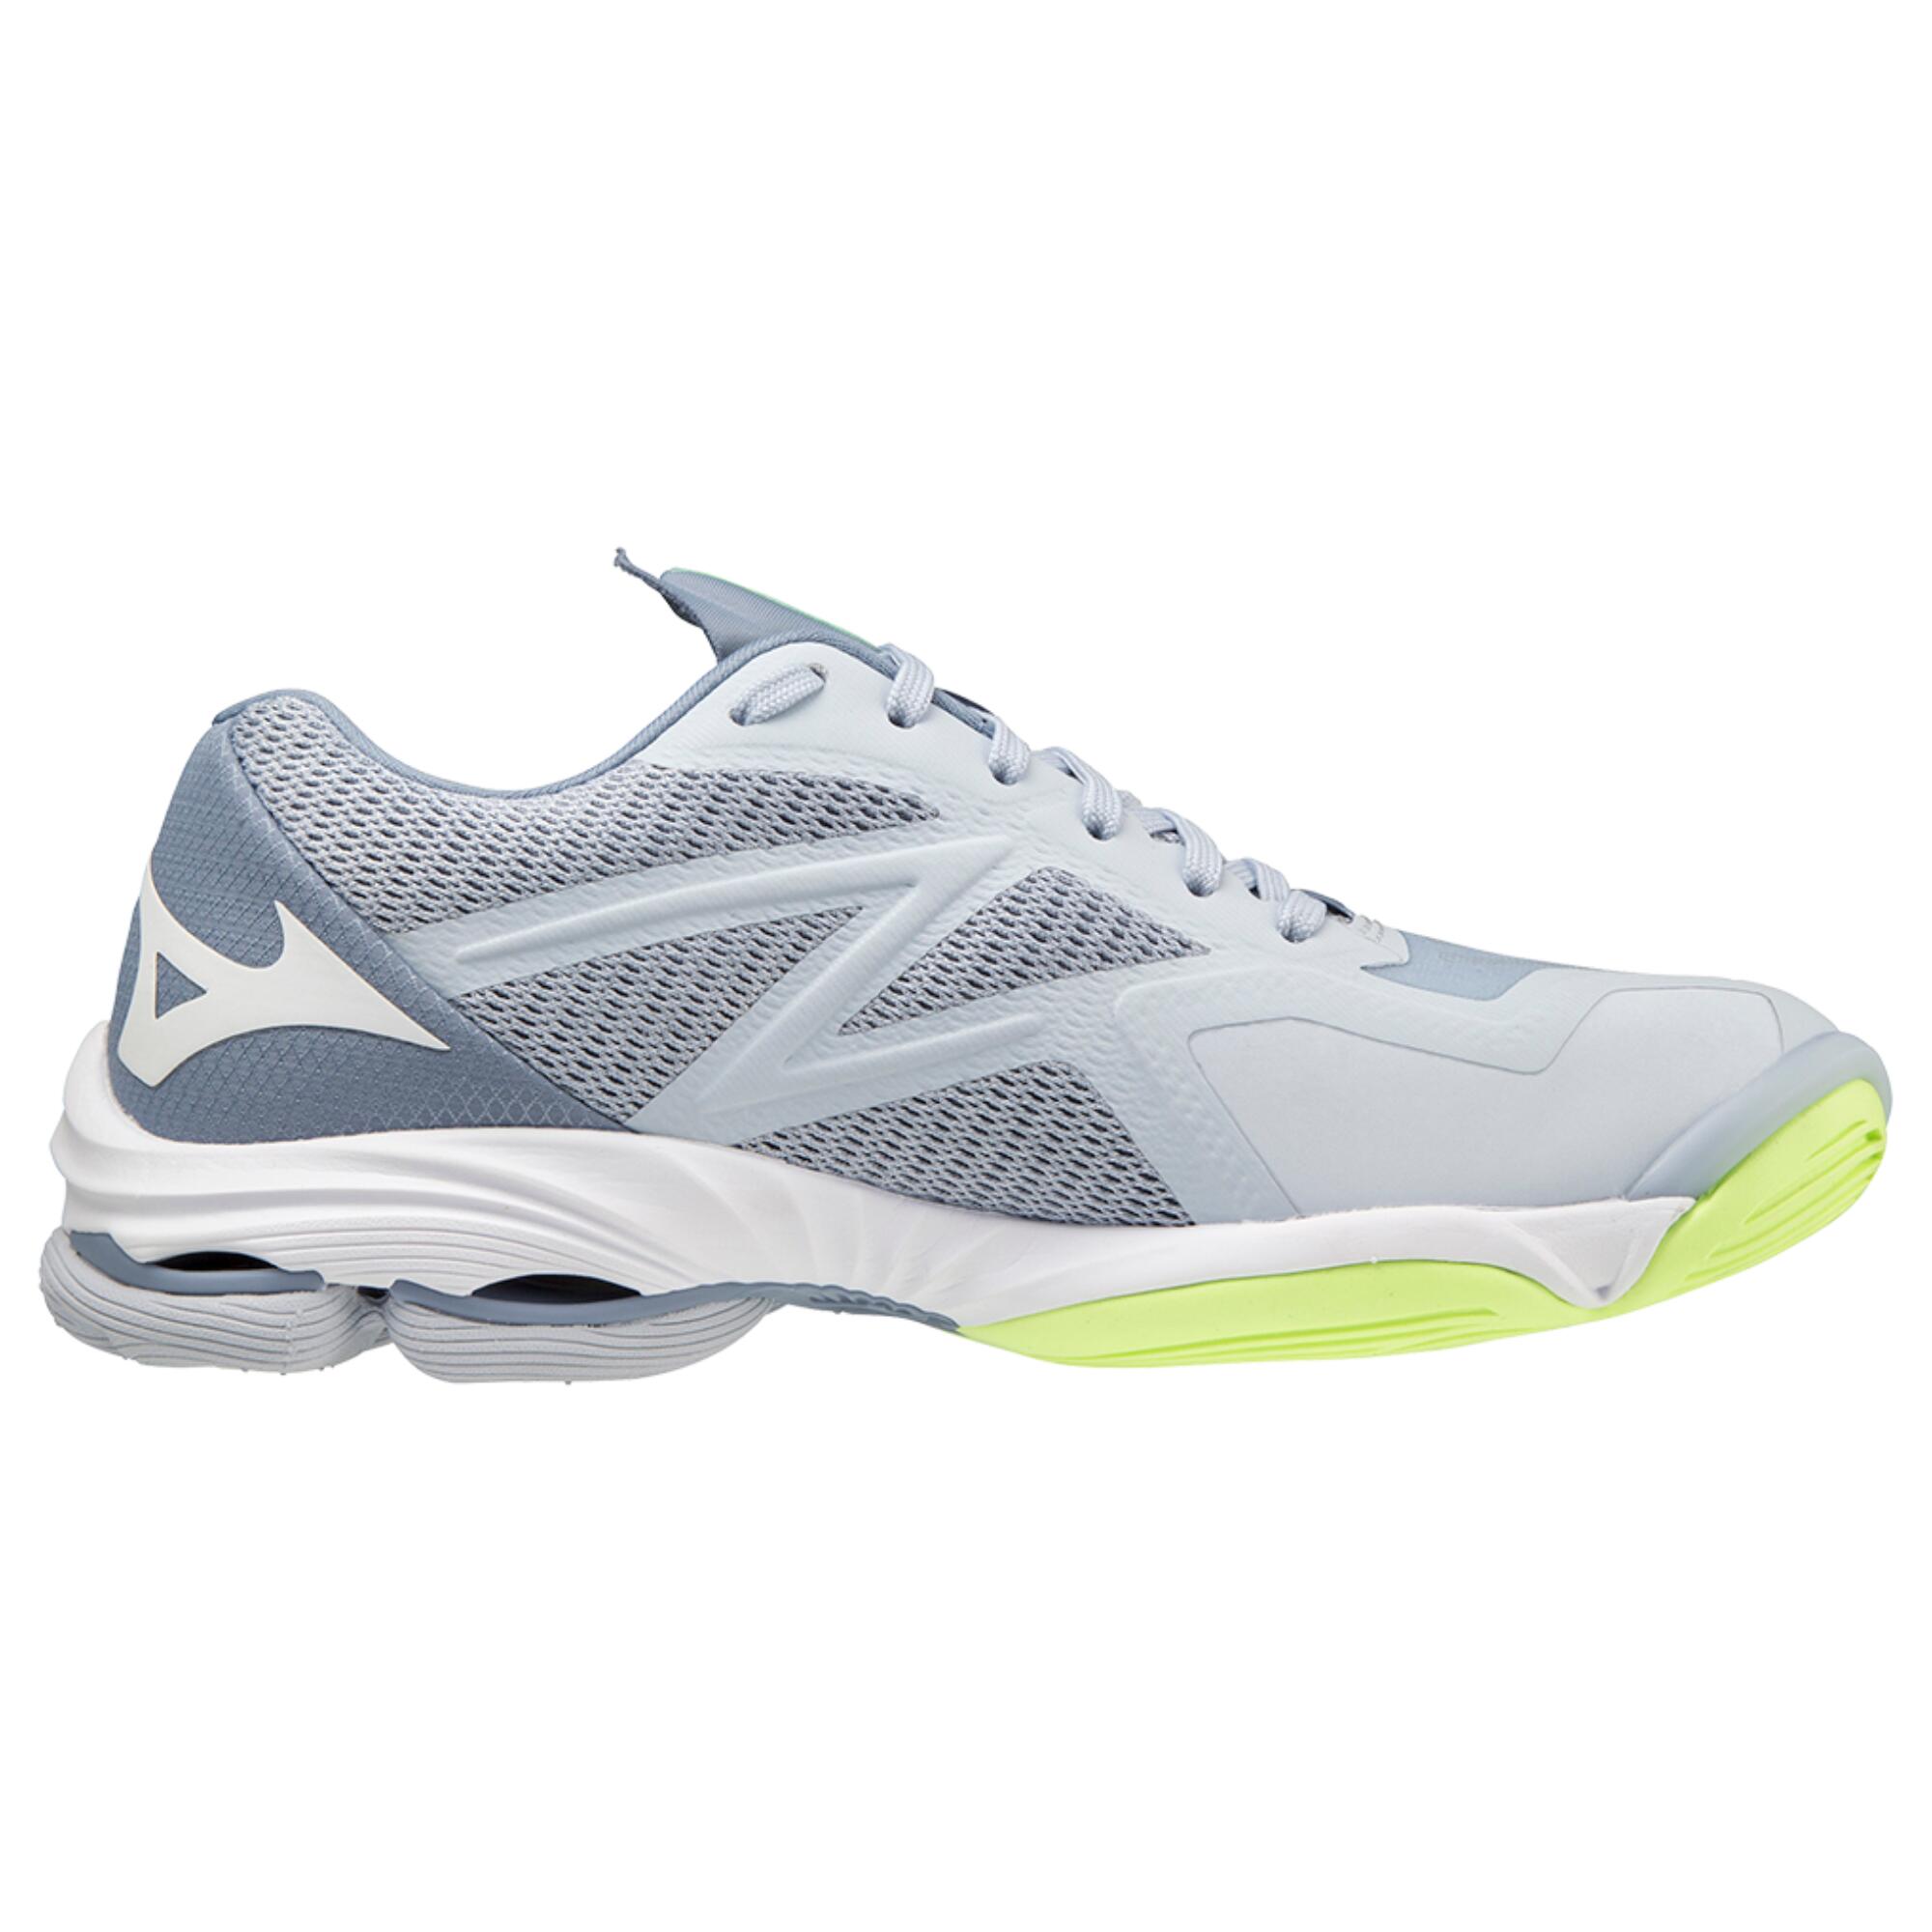 WOMEN'S VOLLEYBALL SHOES MIZUNO LIGHTNING Z7 LOW GREY - LIME 5/5